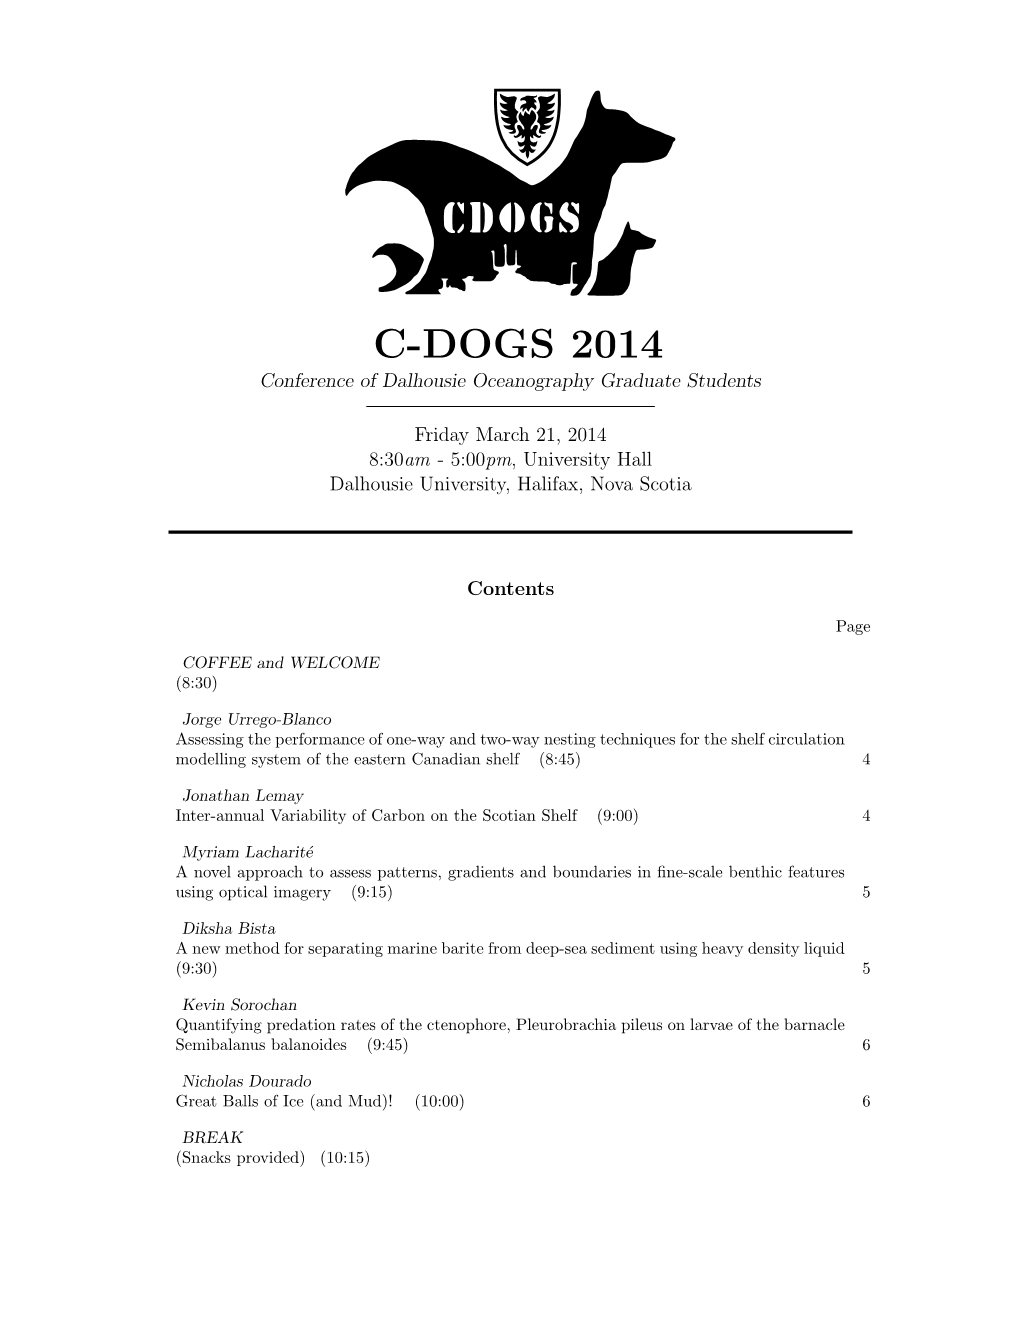 C-DOGS 2014 Conference of Dalhousie Oceanography Graduate Students